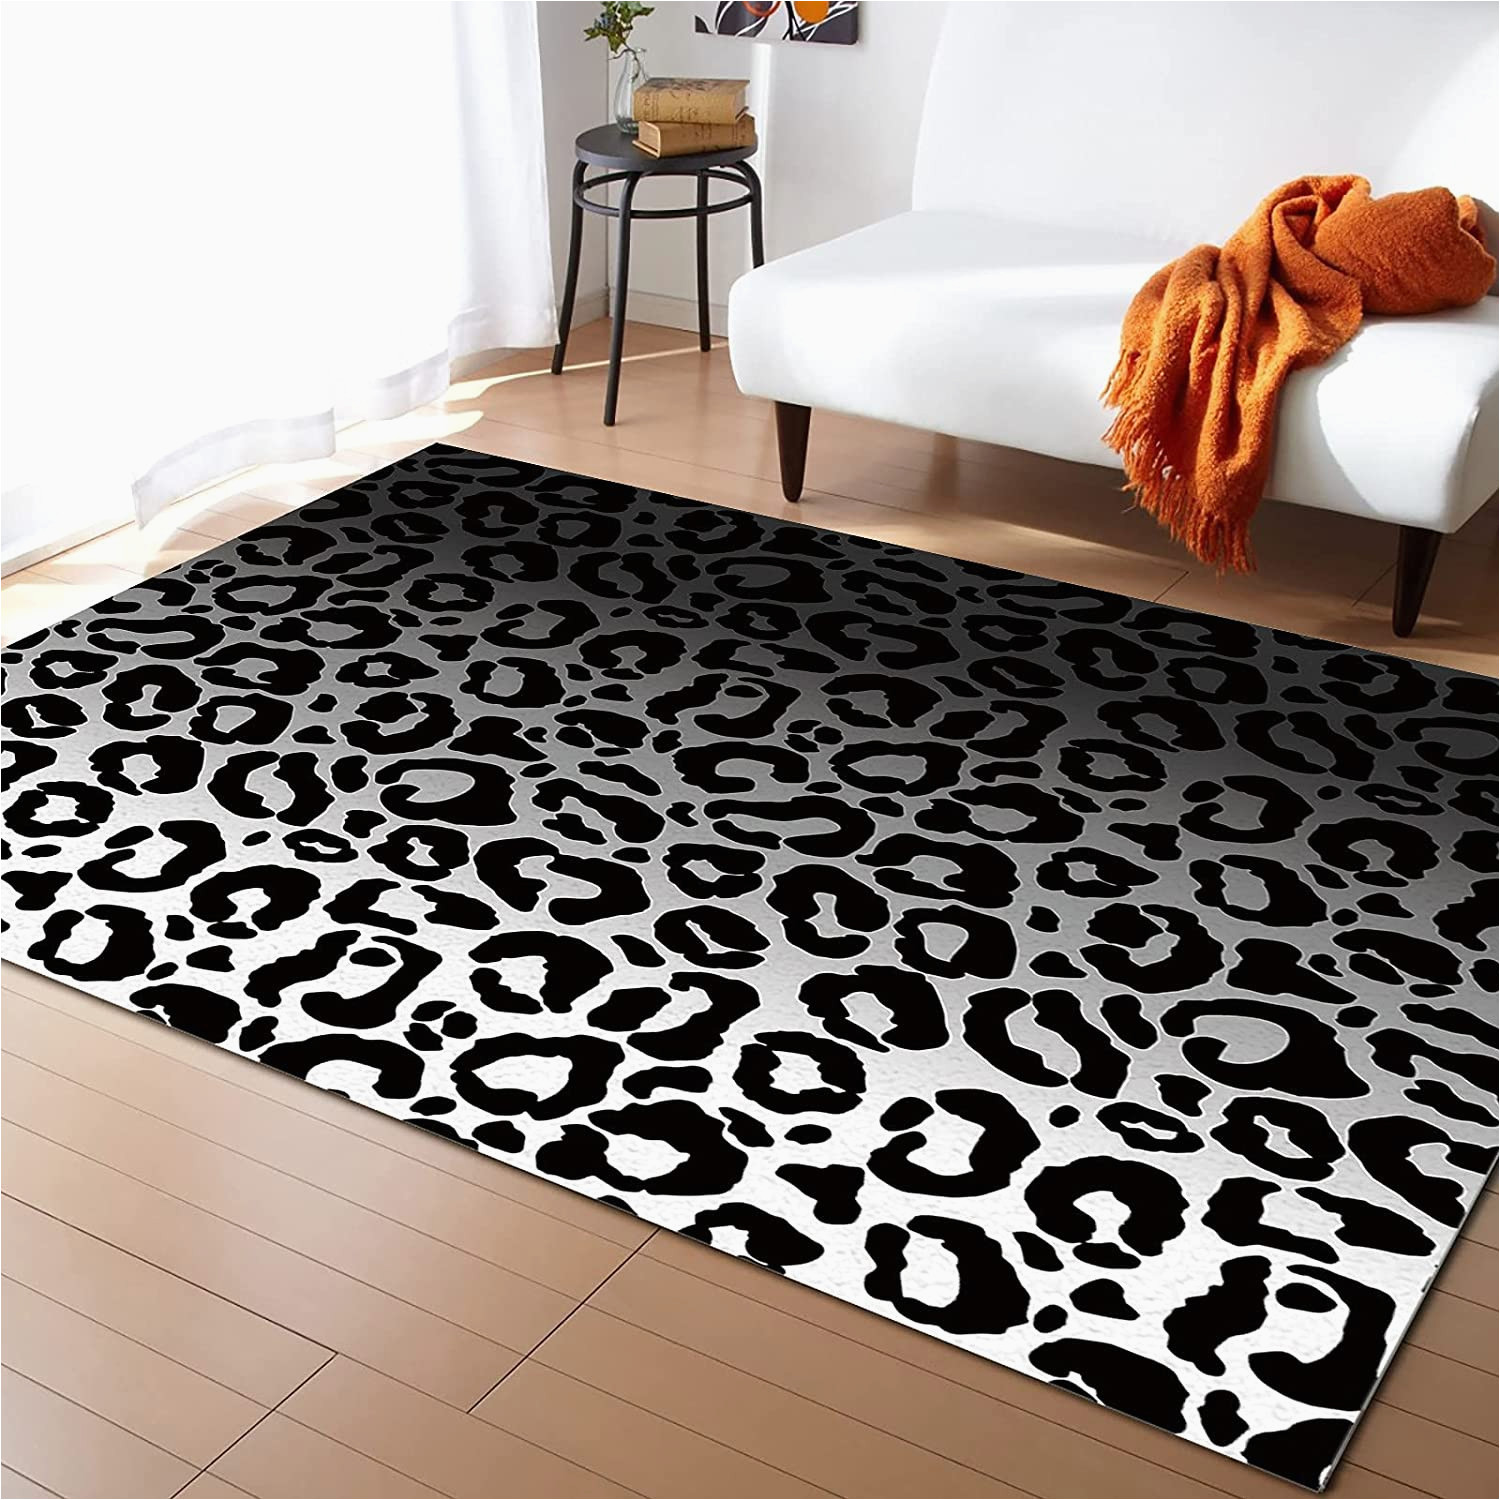 Does Floor and Decor Sell area Rugs Idowmat Rectangular soft area Rug Home Non-slip Floor Decor Selling